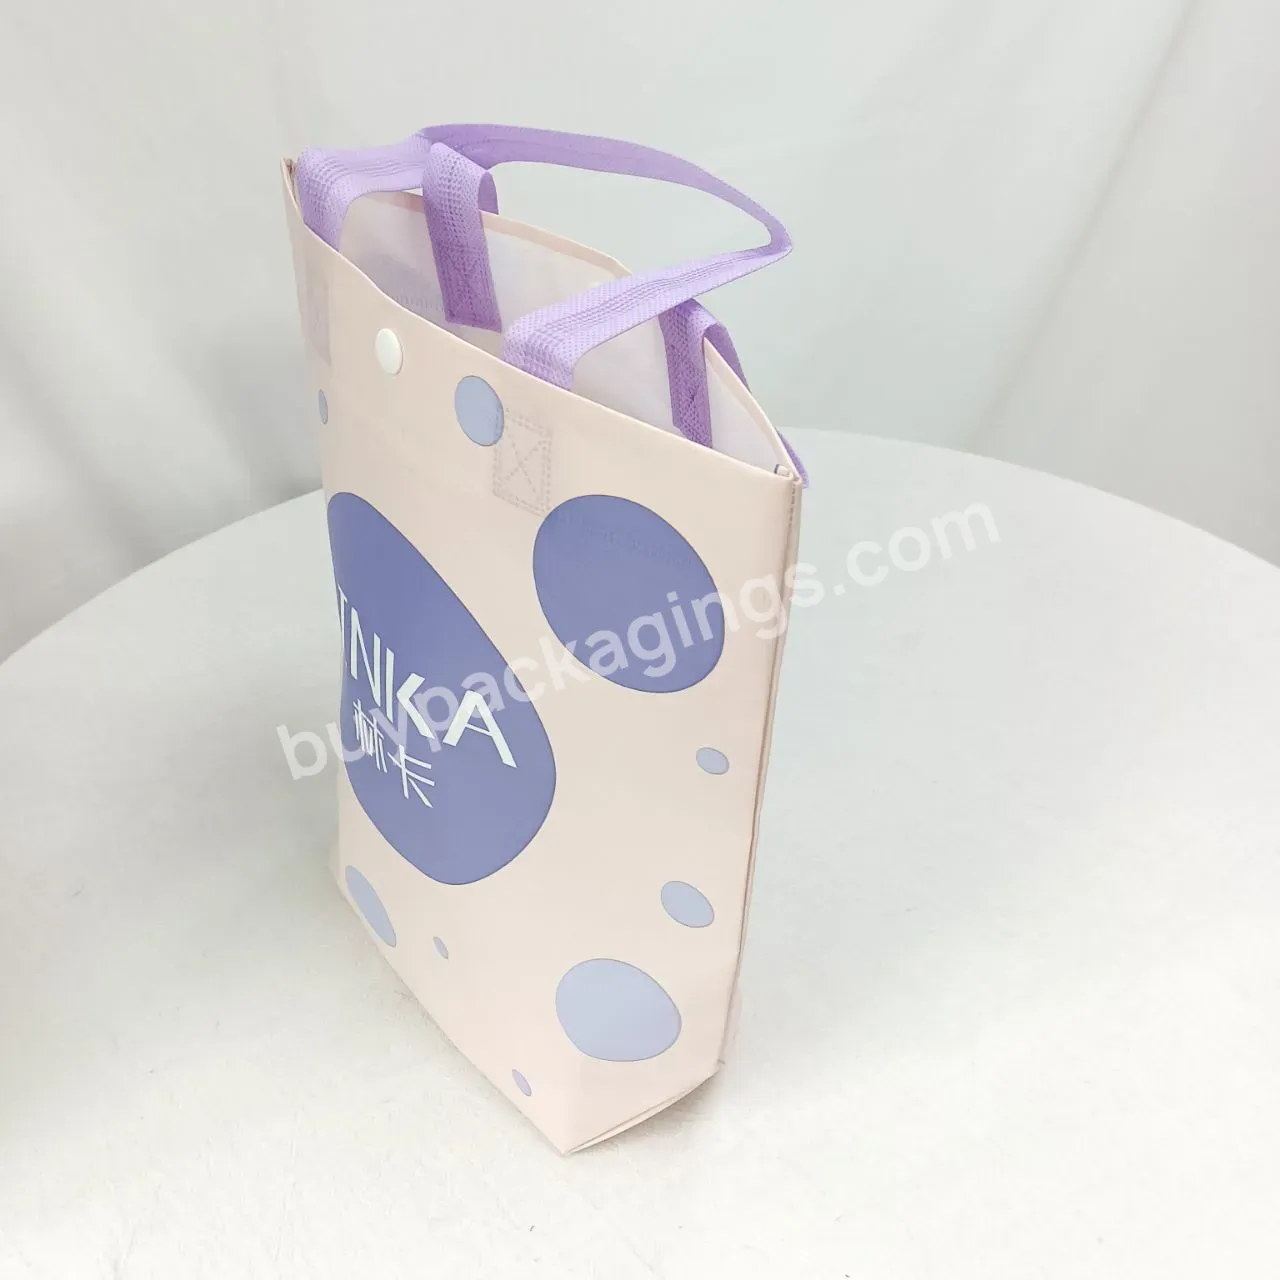 Luxury Eco-friendly Custom Non-woven Bag With Logo Covered With Bright Film Reusable Non-woven Bag For Shopping - Buy Cute Non-woven Bag With Logo,Large Size Non-woven Bag,Gorgeous Non-woven Bags.